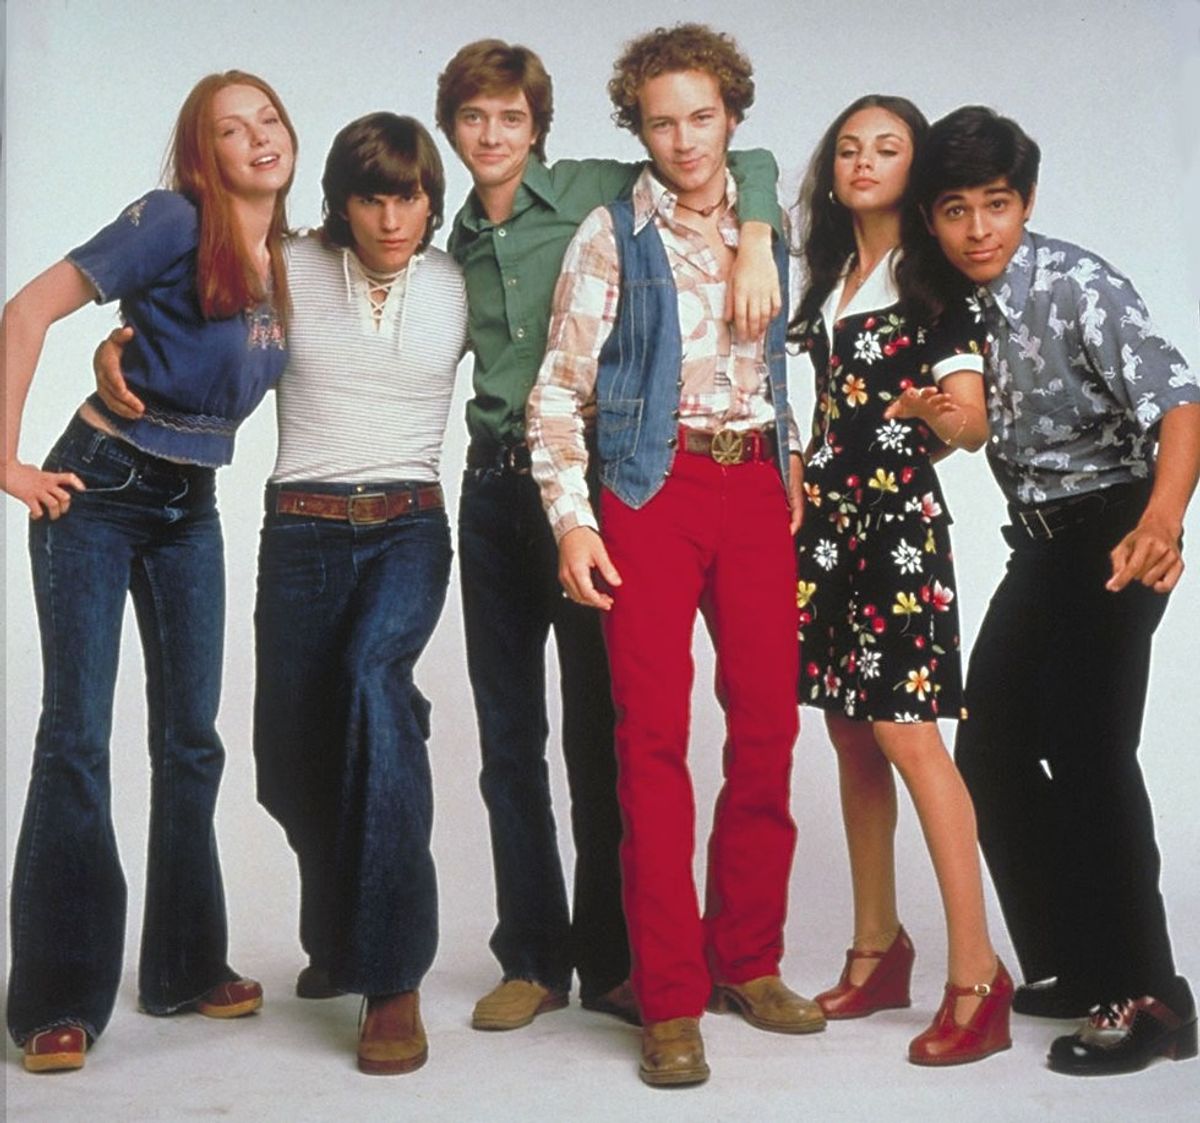 College As Told By 'That 70's Show'